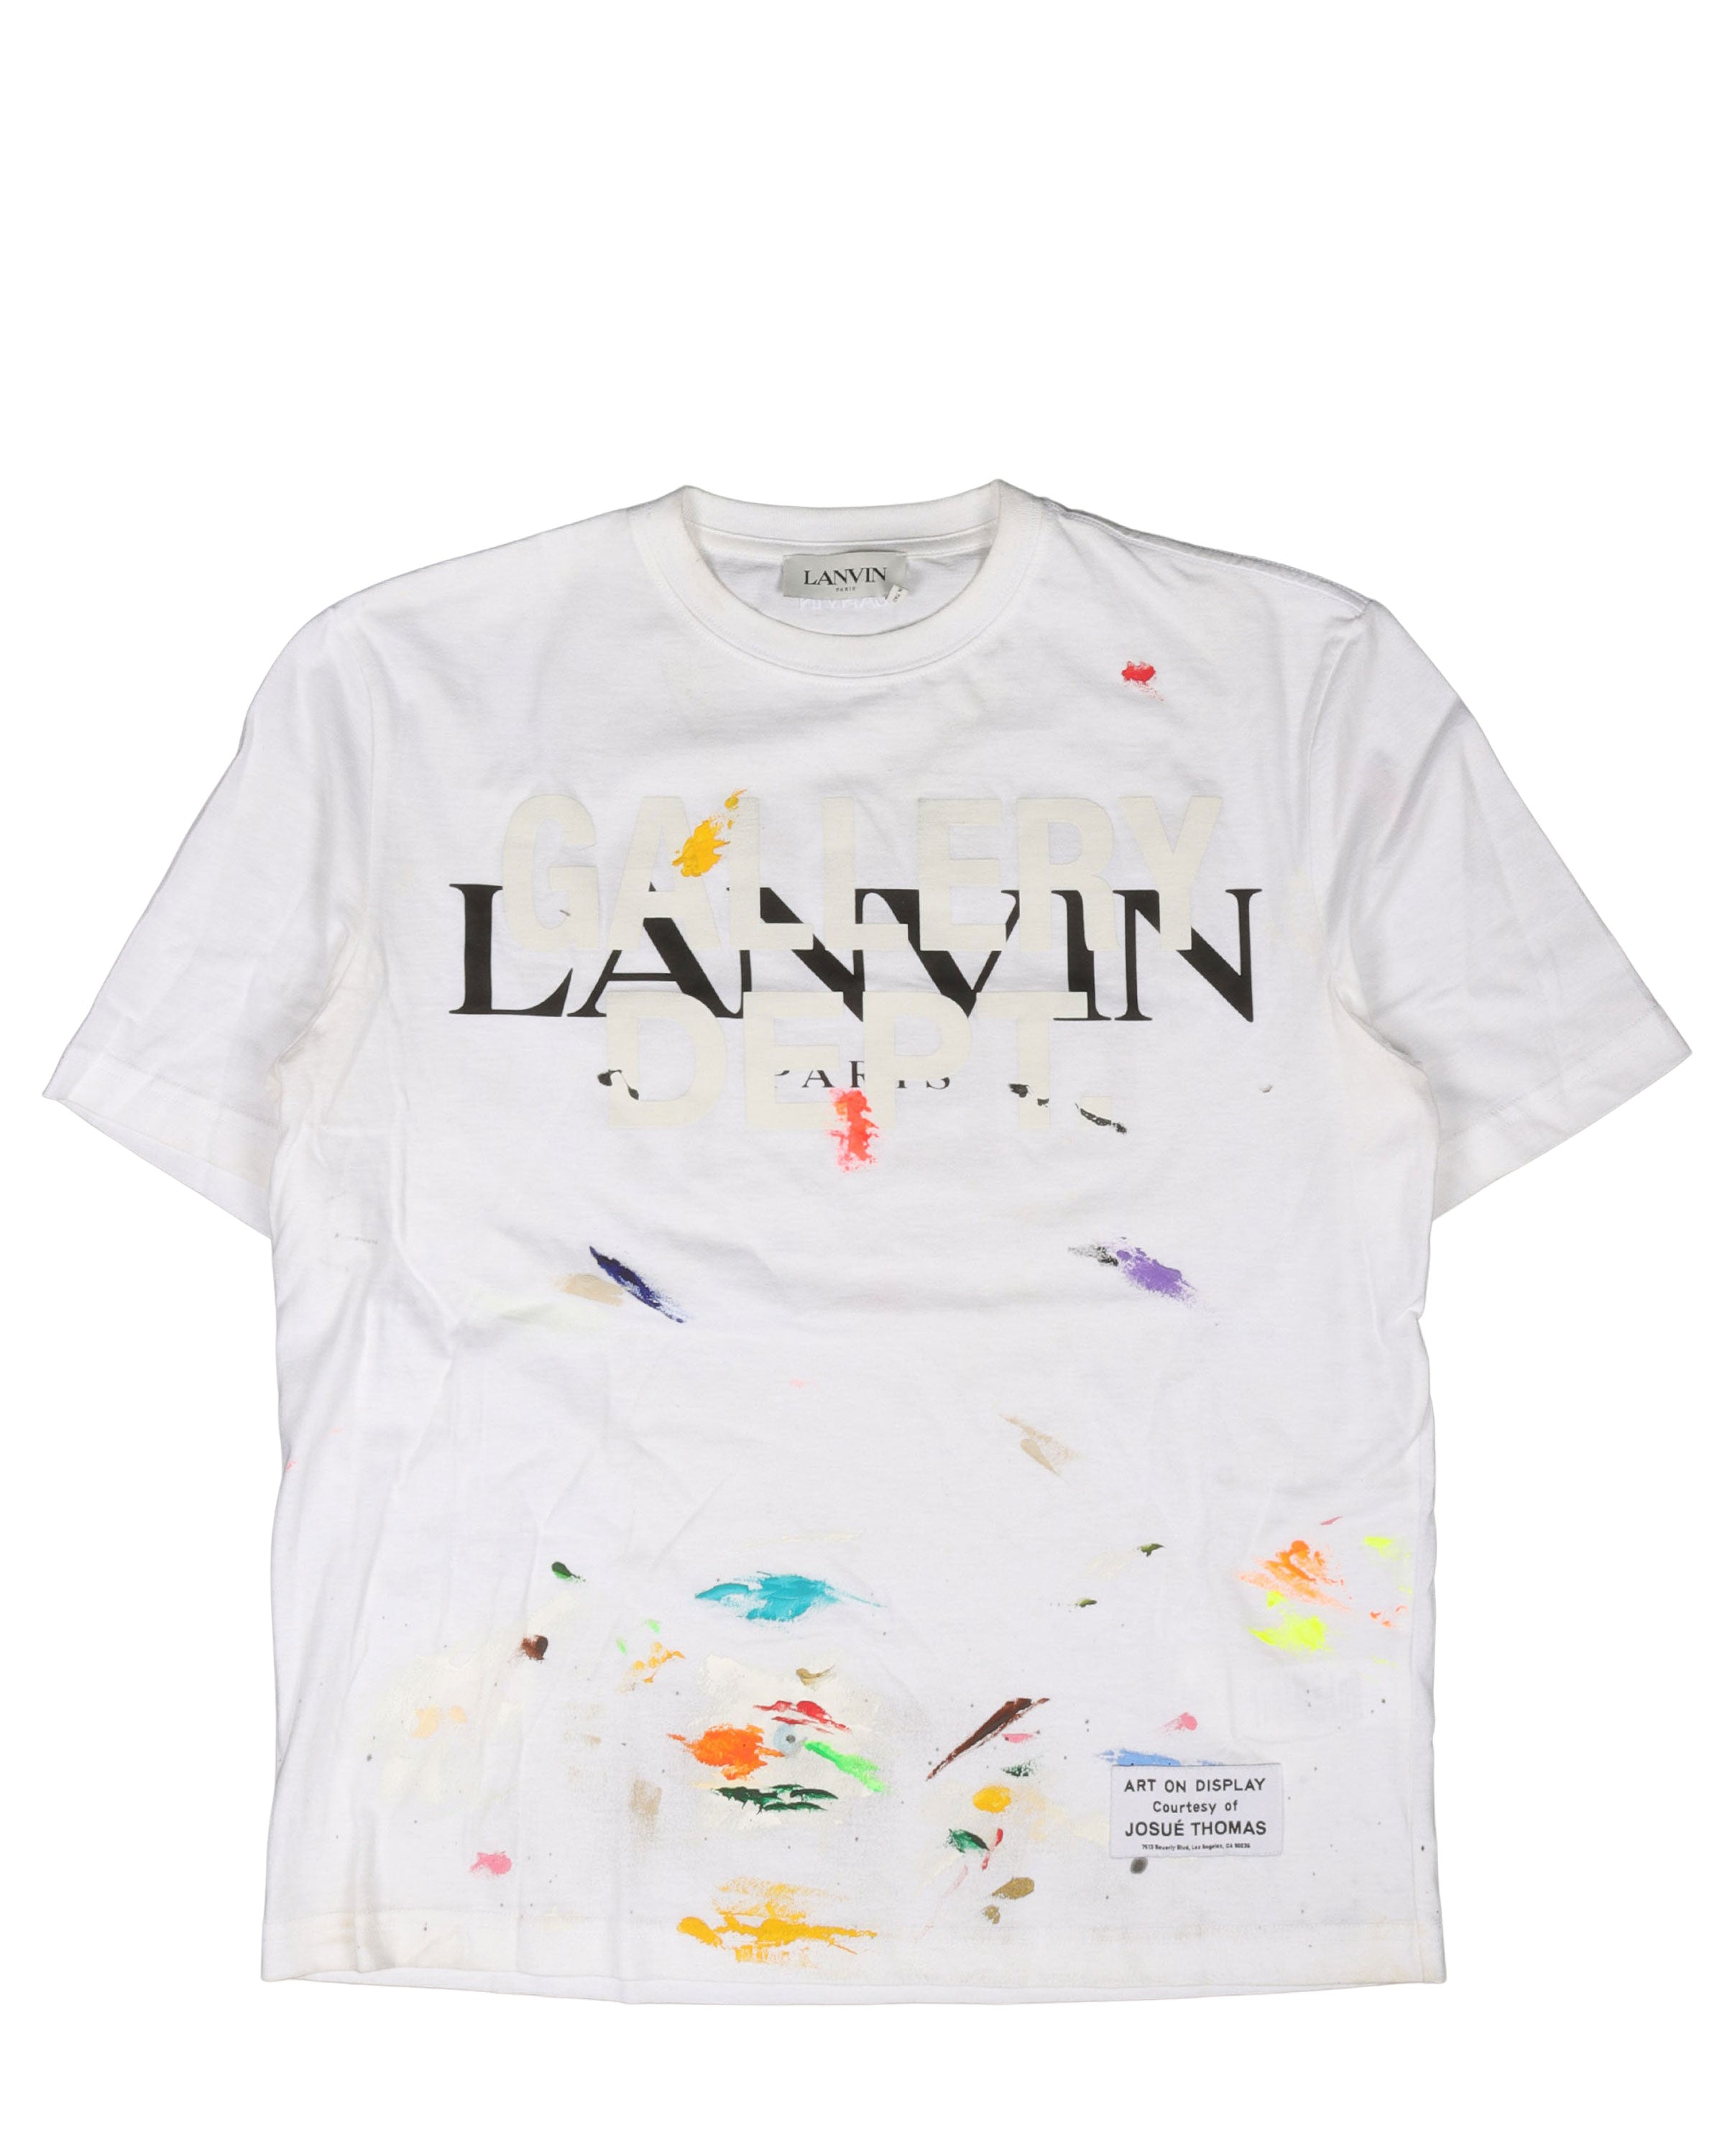 Gallery Dept. Painted T-Shirt